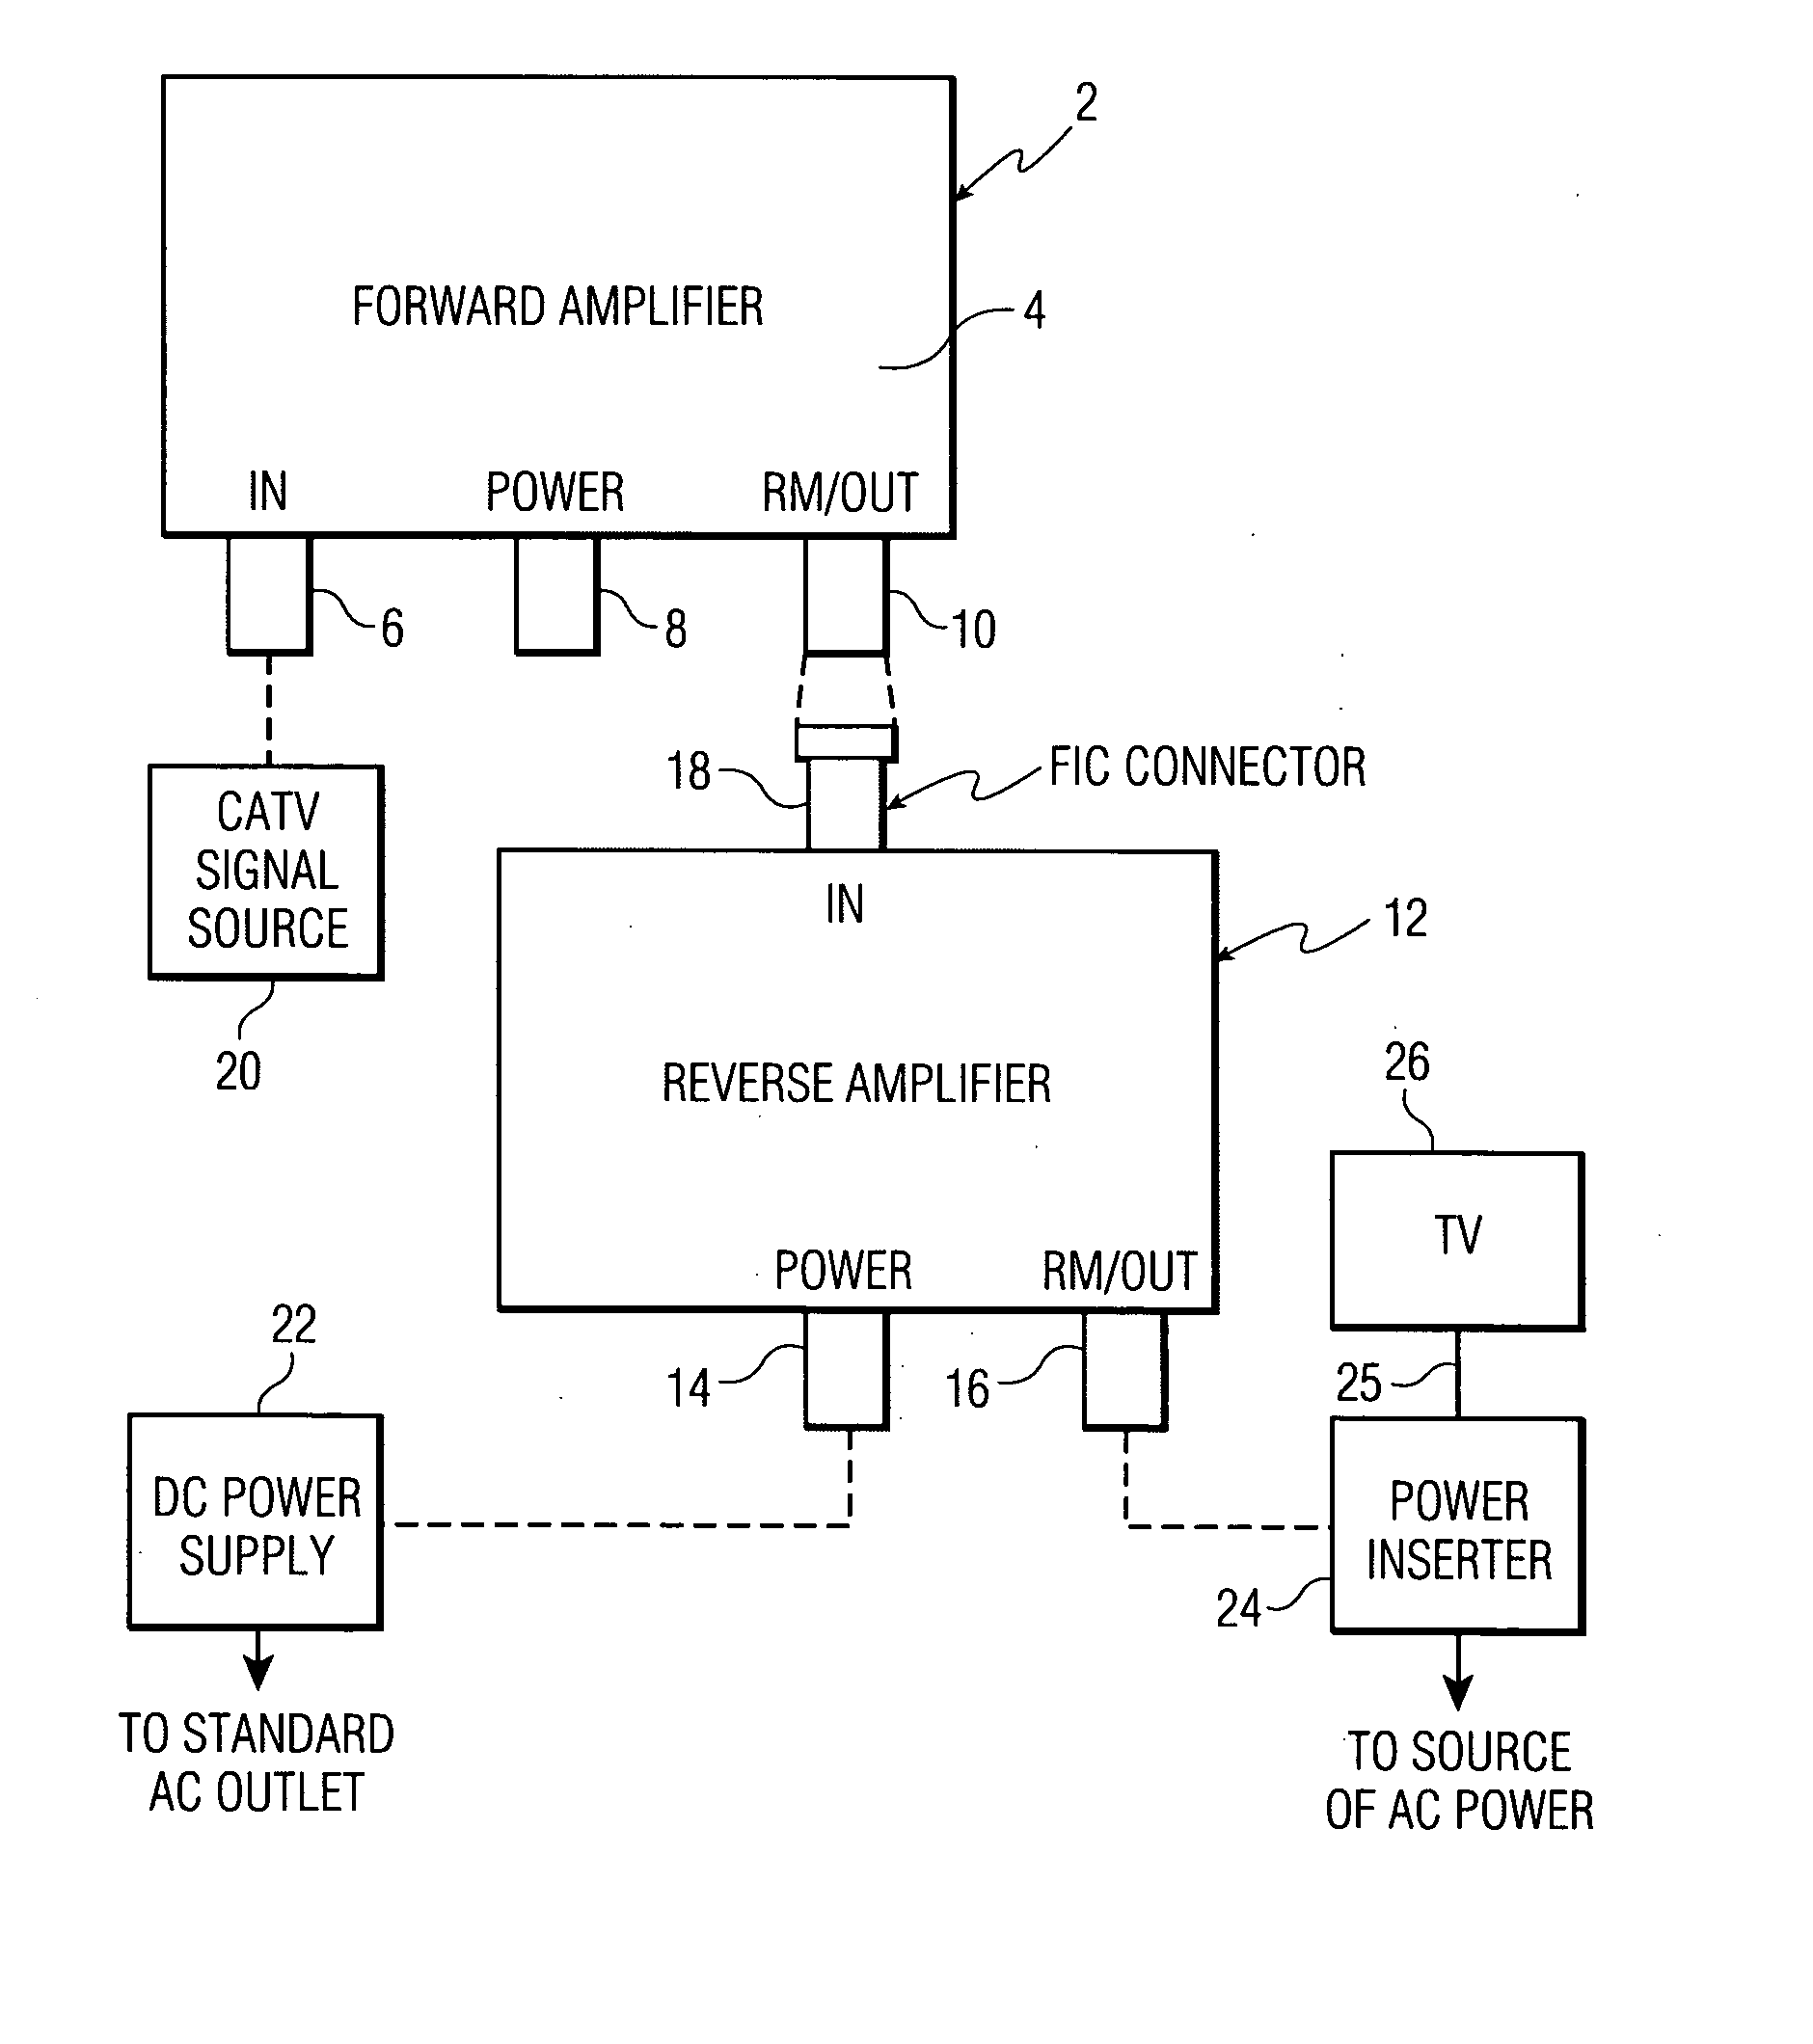 Cable television reverse amplifier